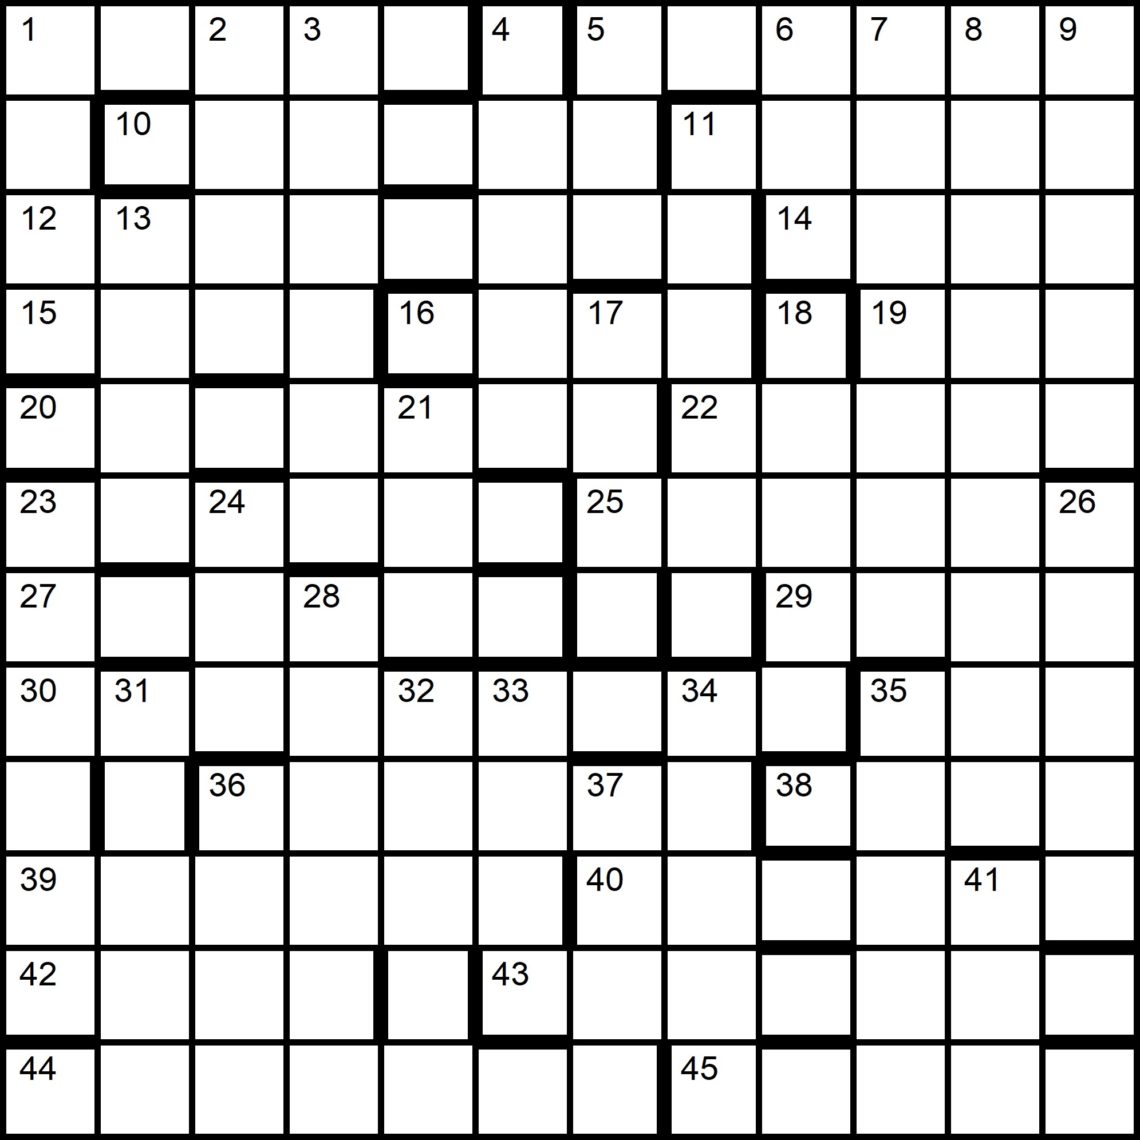 Barred cryptic crossword grid